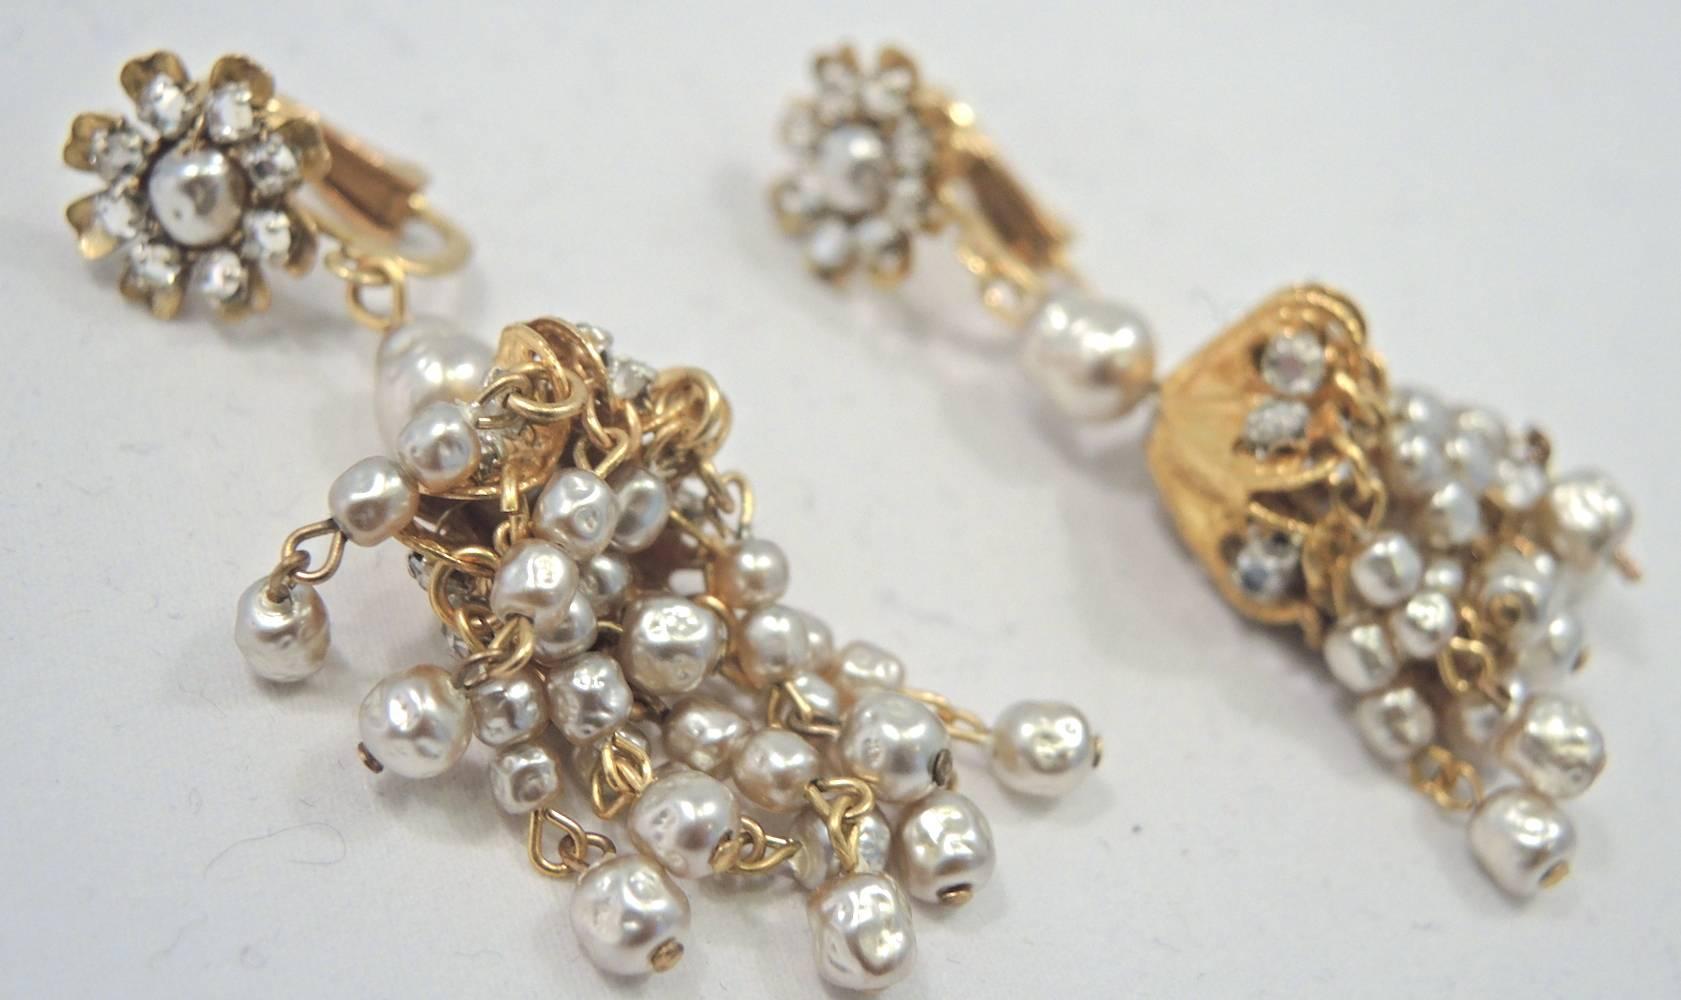 These vintage signed Miriam Haskell earrings features faux pearls hanging like a flowing chandelier with crystal accents in a gold-tone setting.  In excellent condition, these clip earrings measure 2” x 3/4” and are signed “Miriam Haskell”.